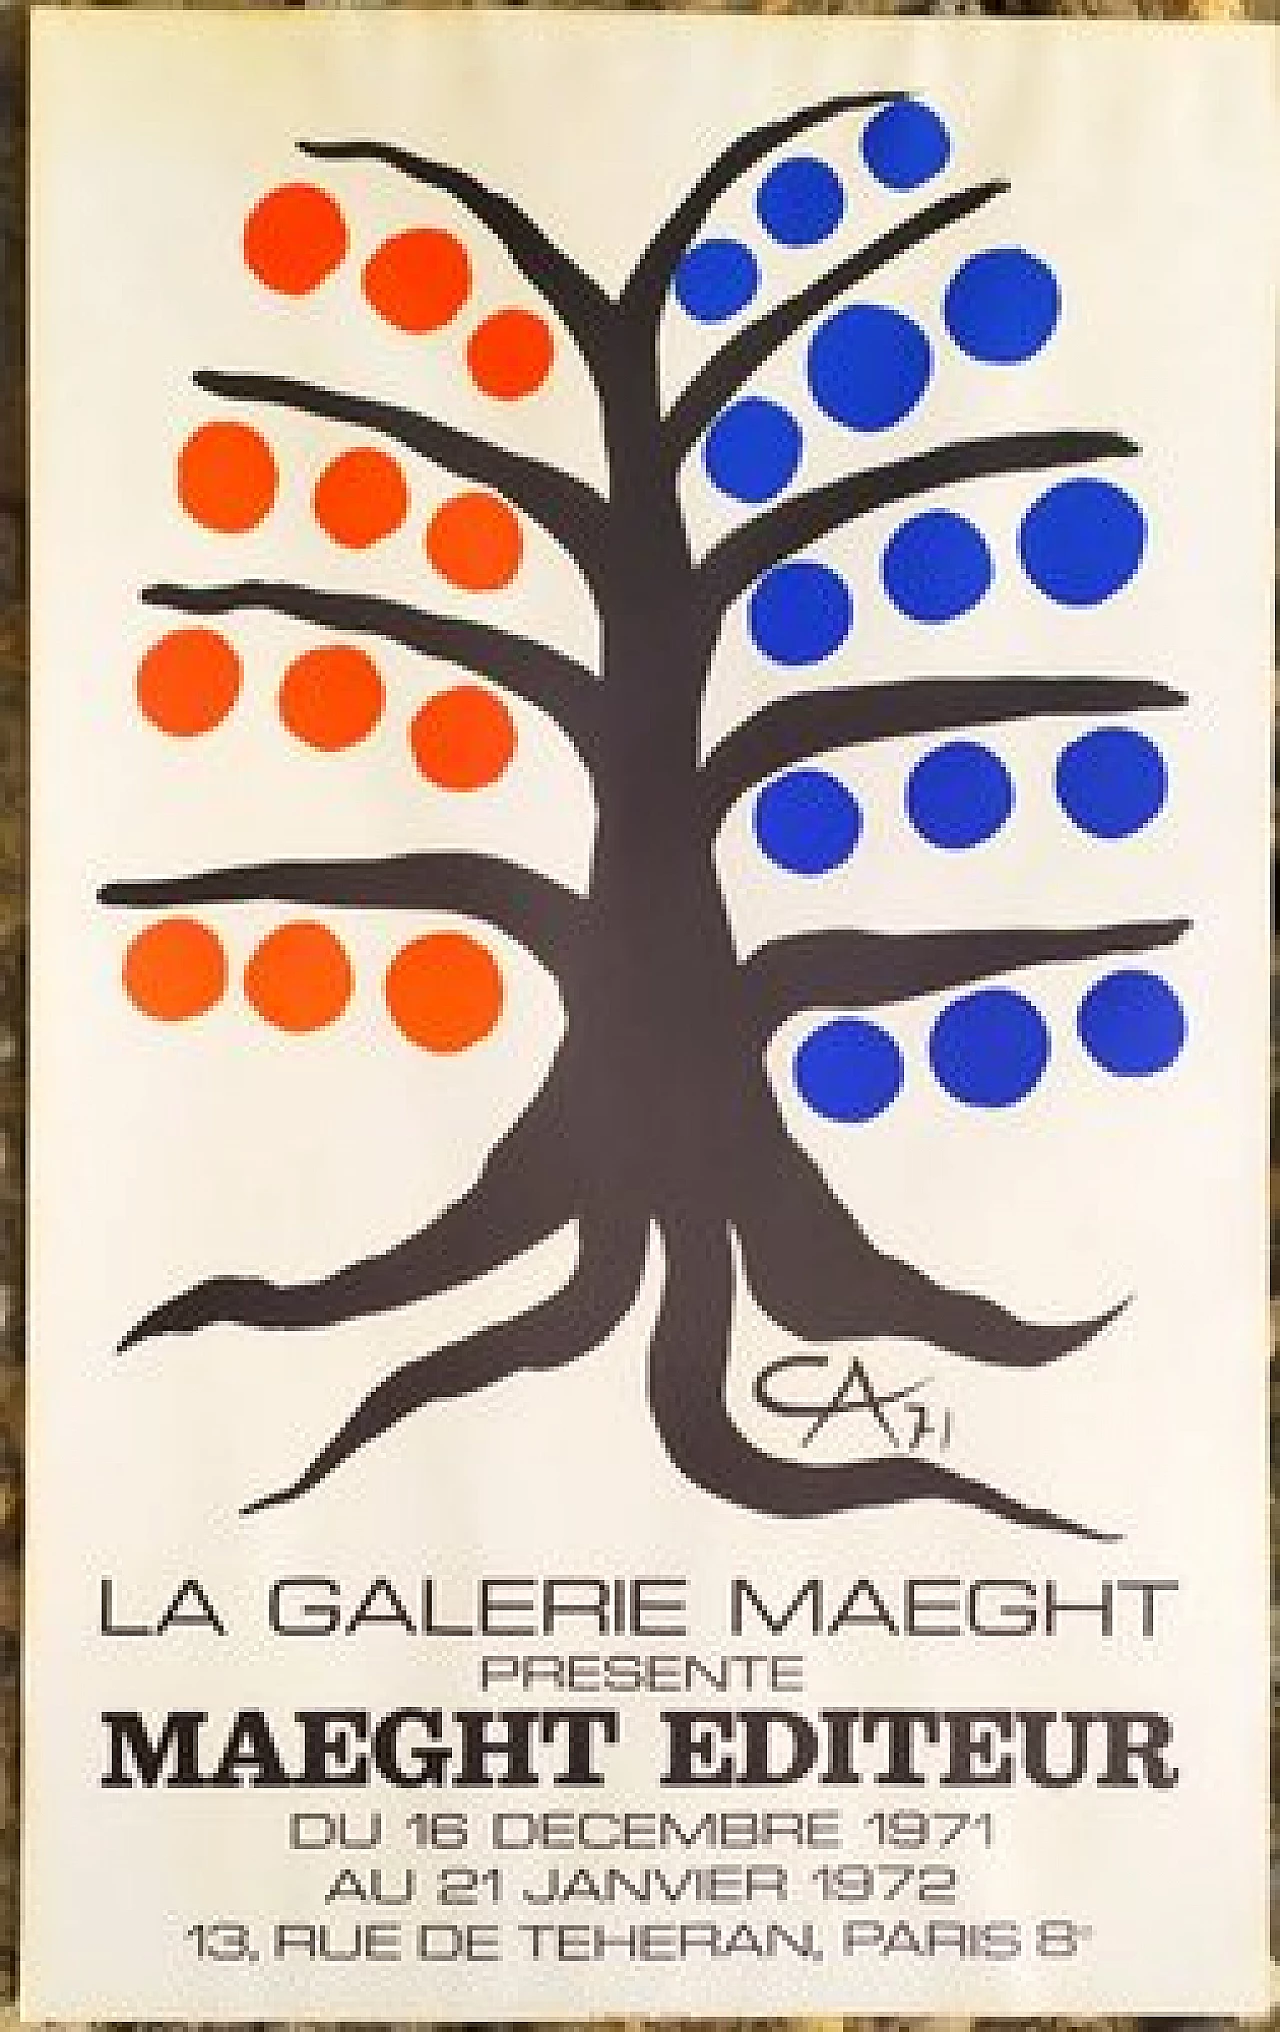 Lithographic poster by Alexander Calder, 1971 1